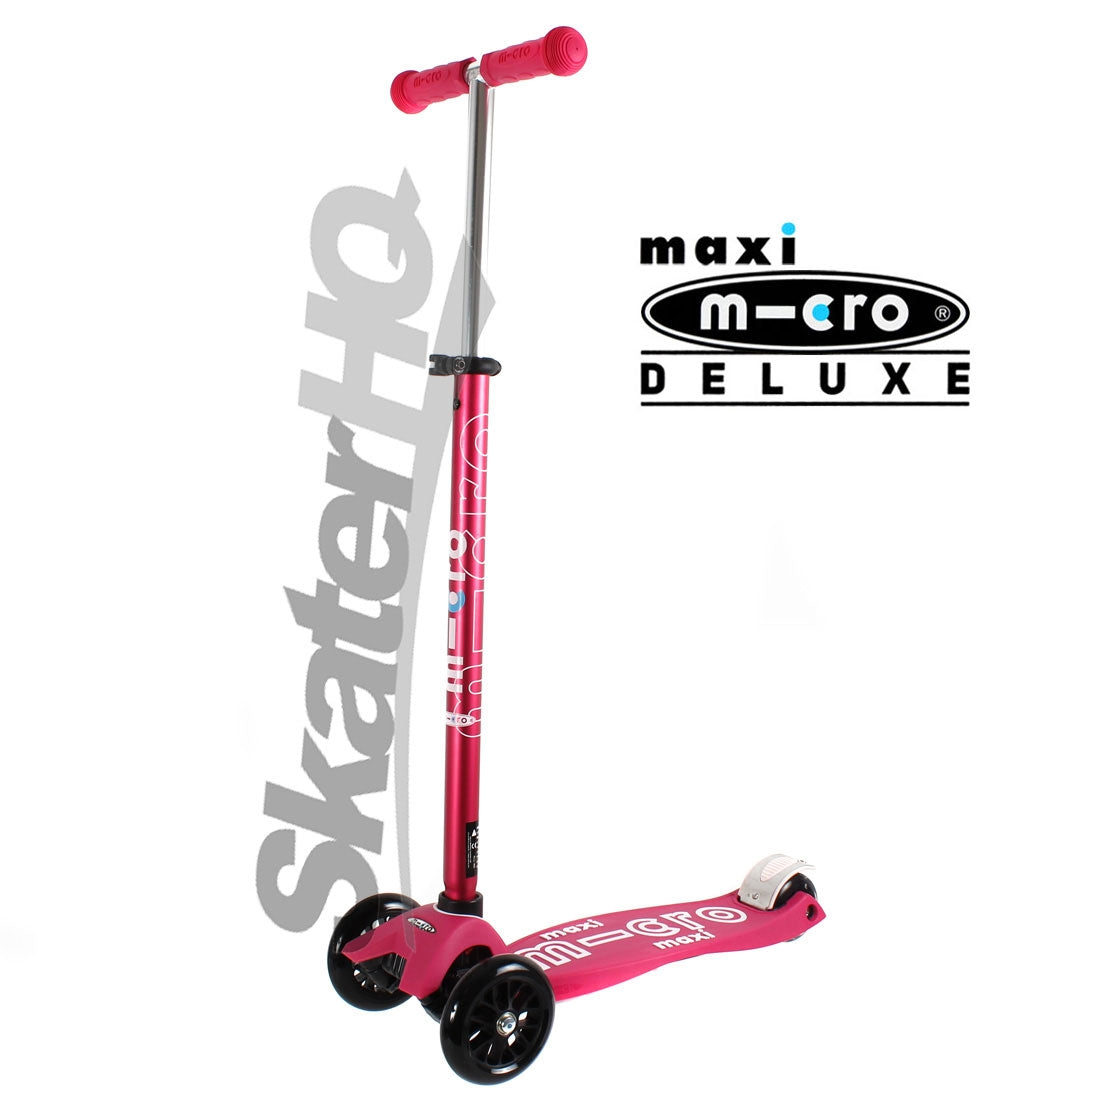 Micro Maxi Deluxe Scooter - Pink Scooter Completes Rec